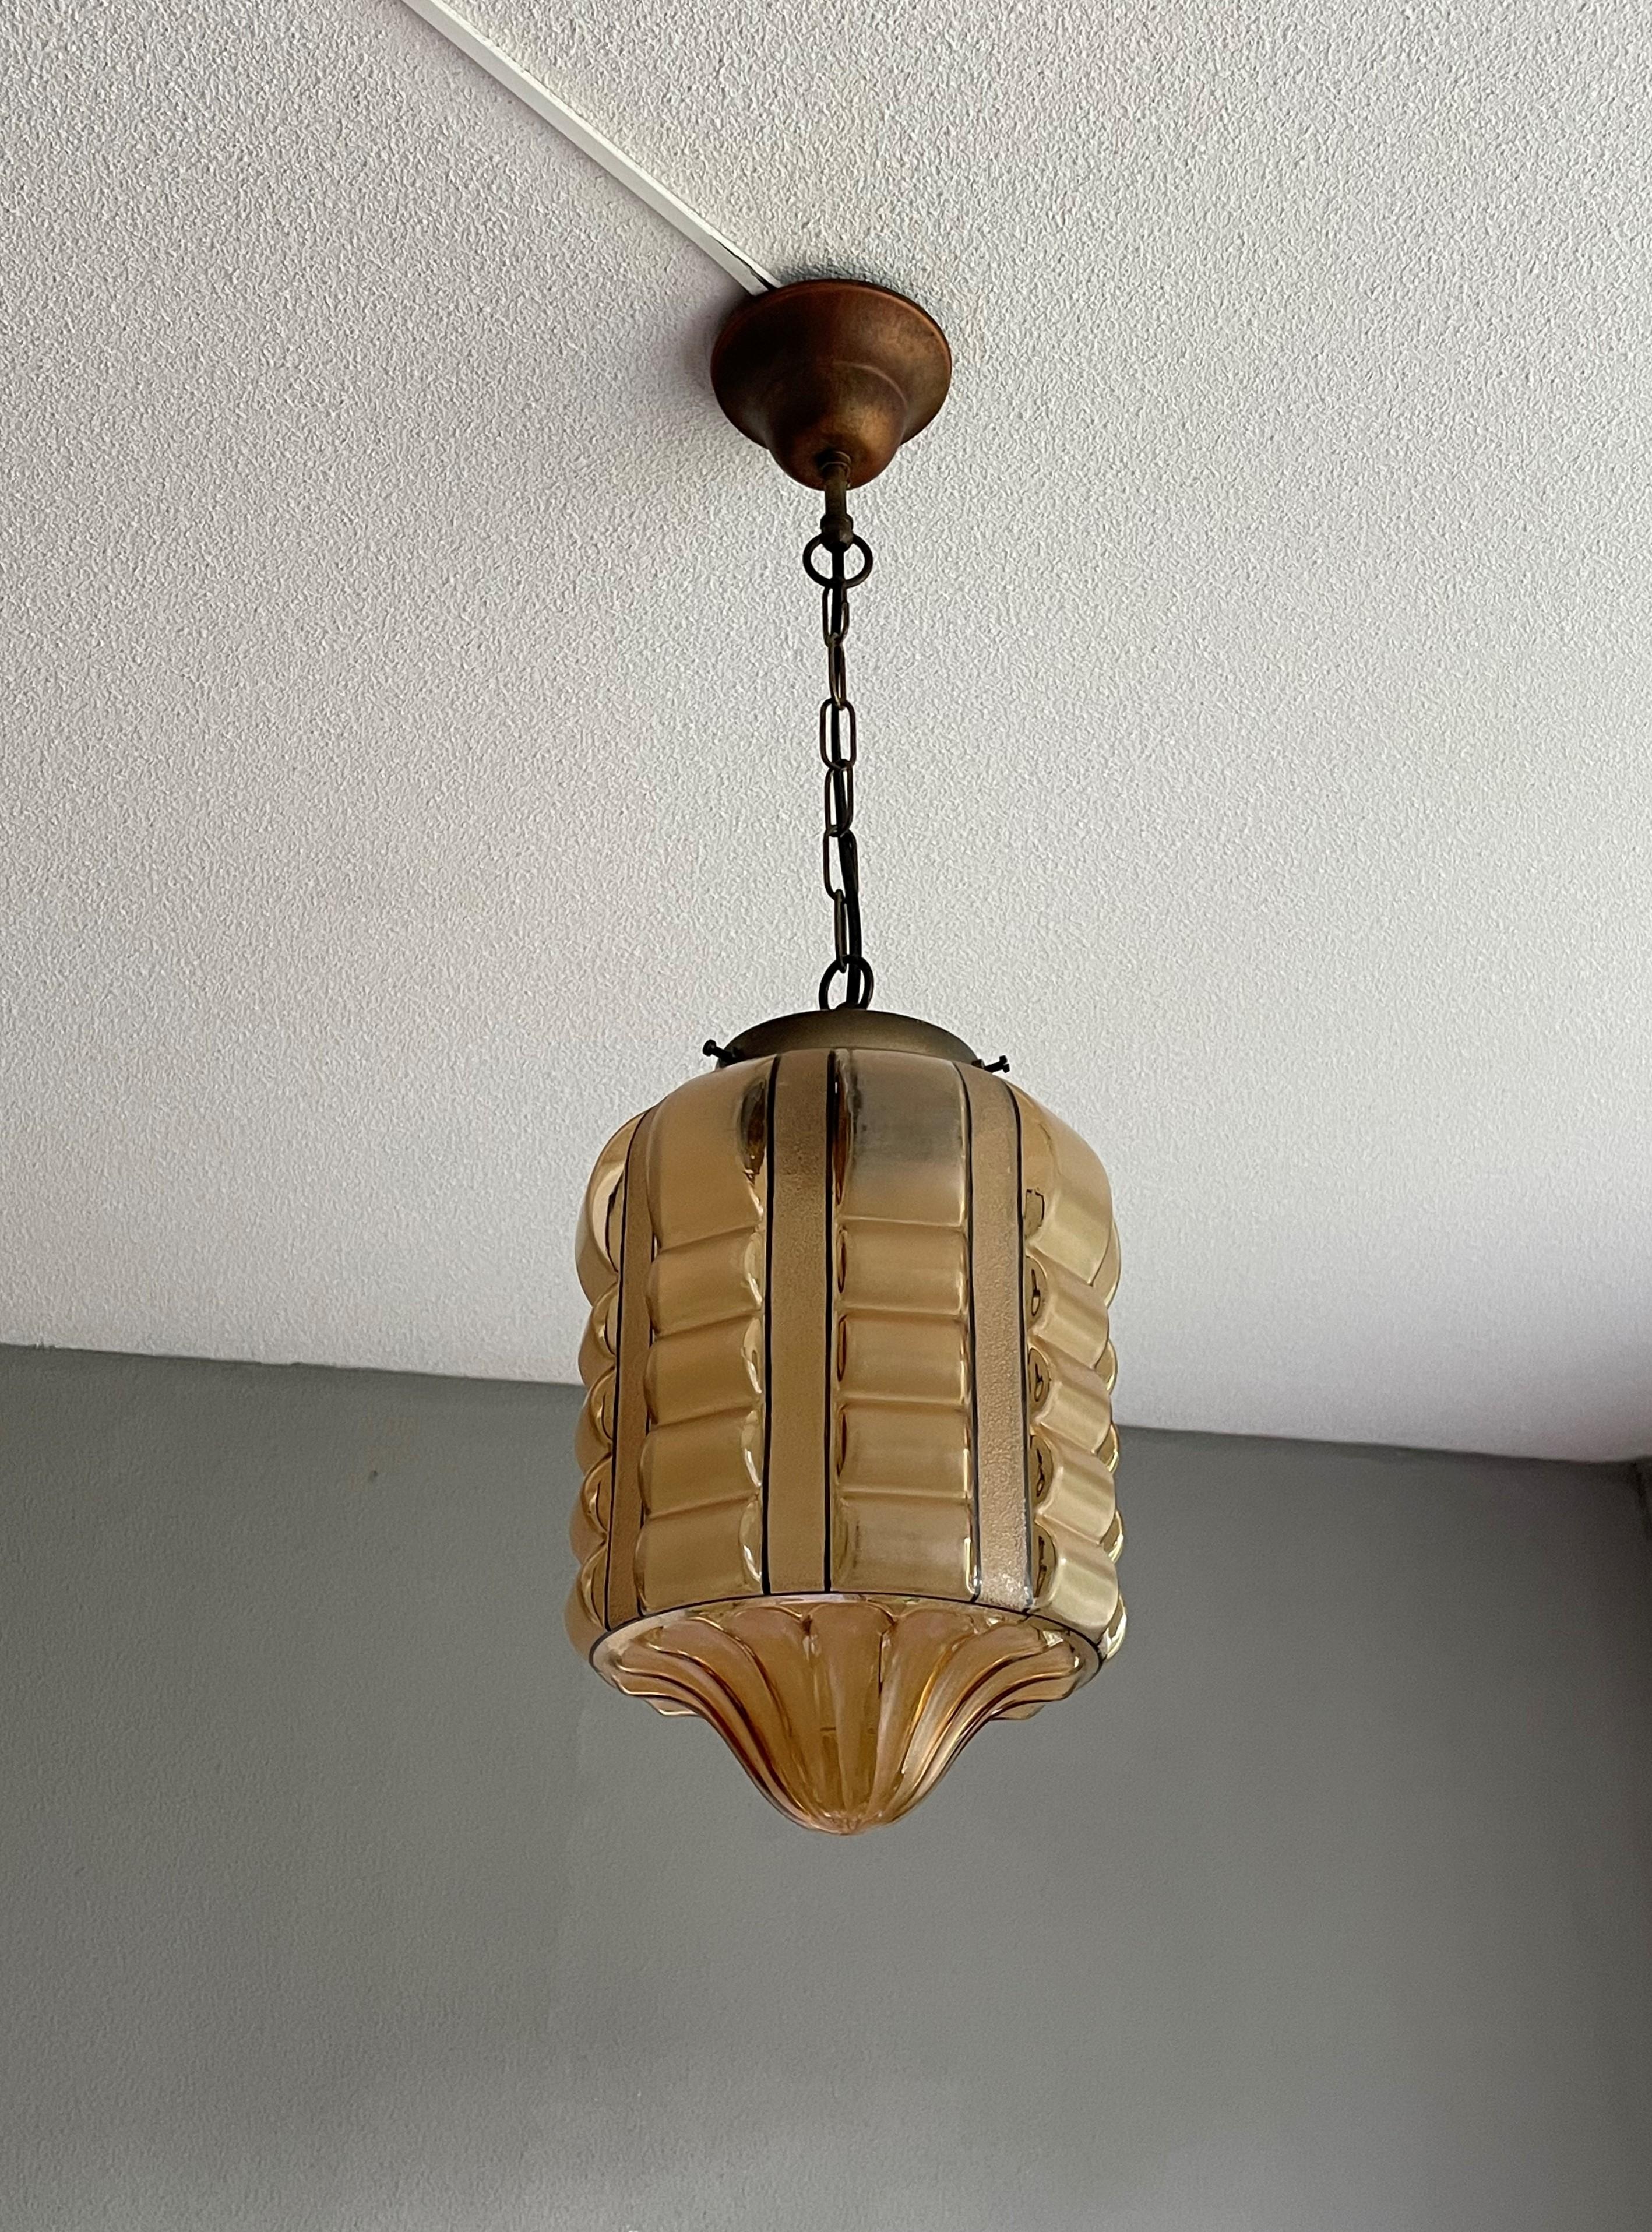 Rare Rounded Geometrical Design Art Deco Pendant Light with Brass Chain & Canopy 7